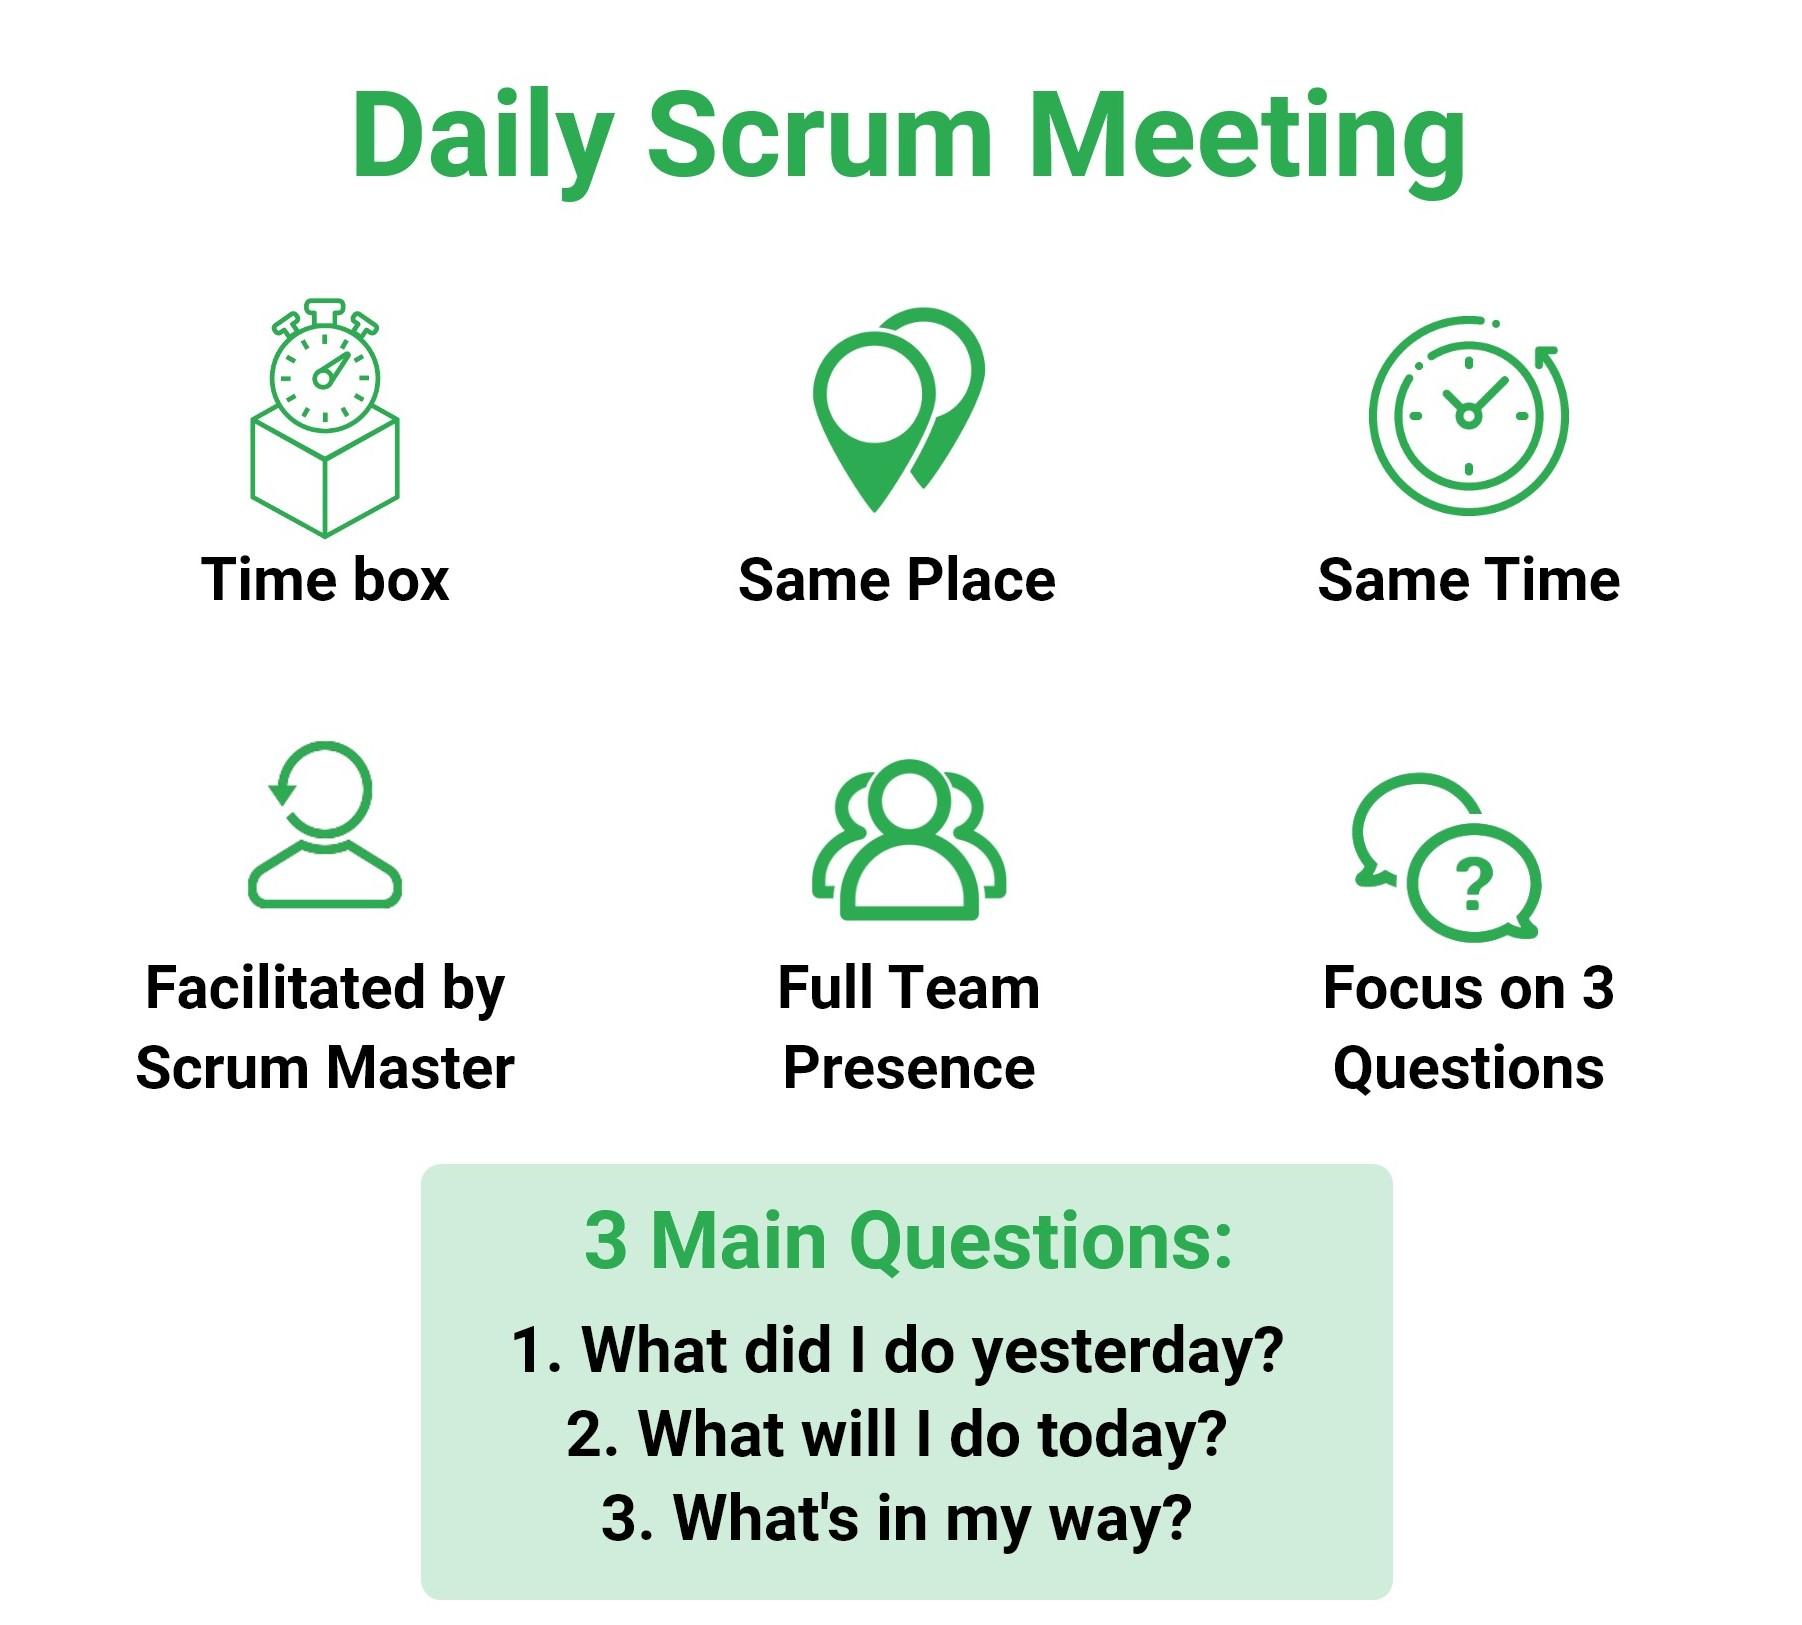 Daily Scrum meeting